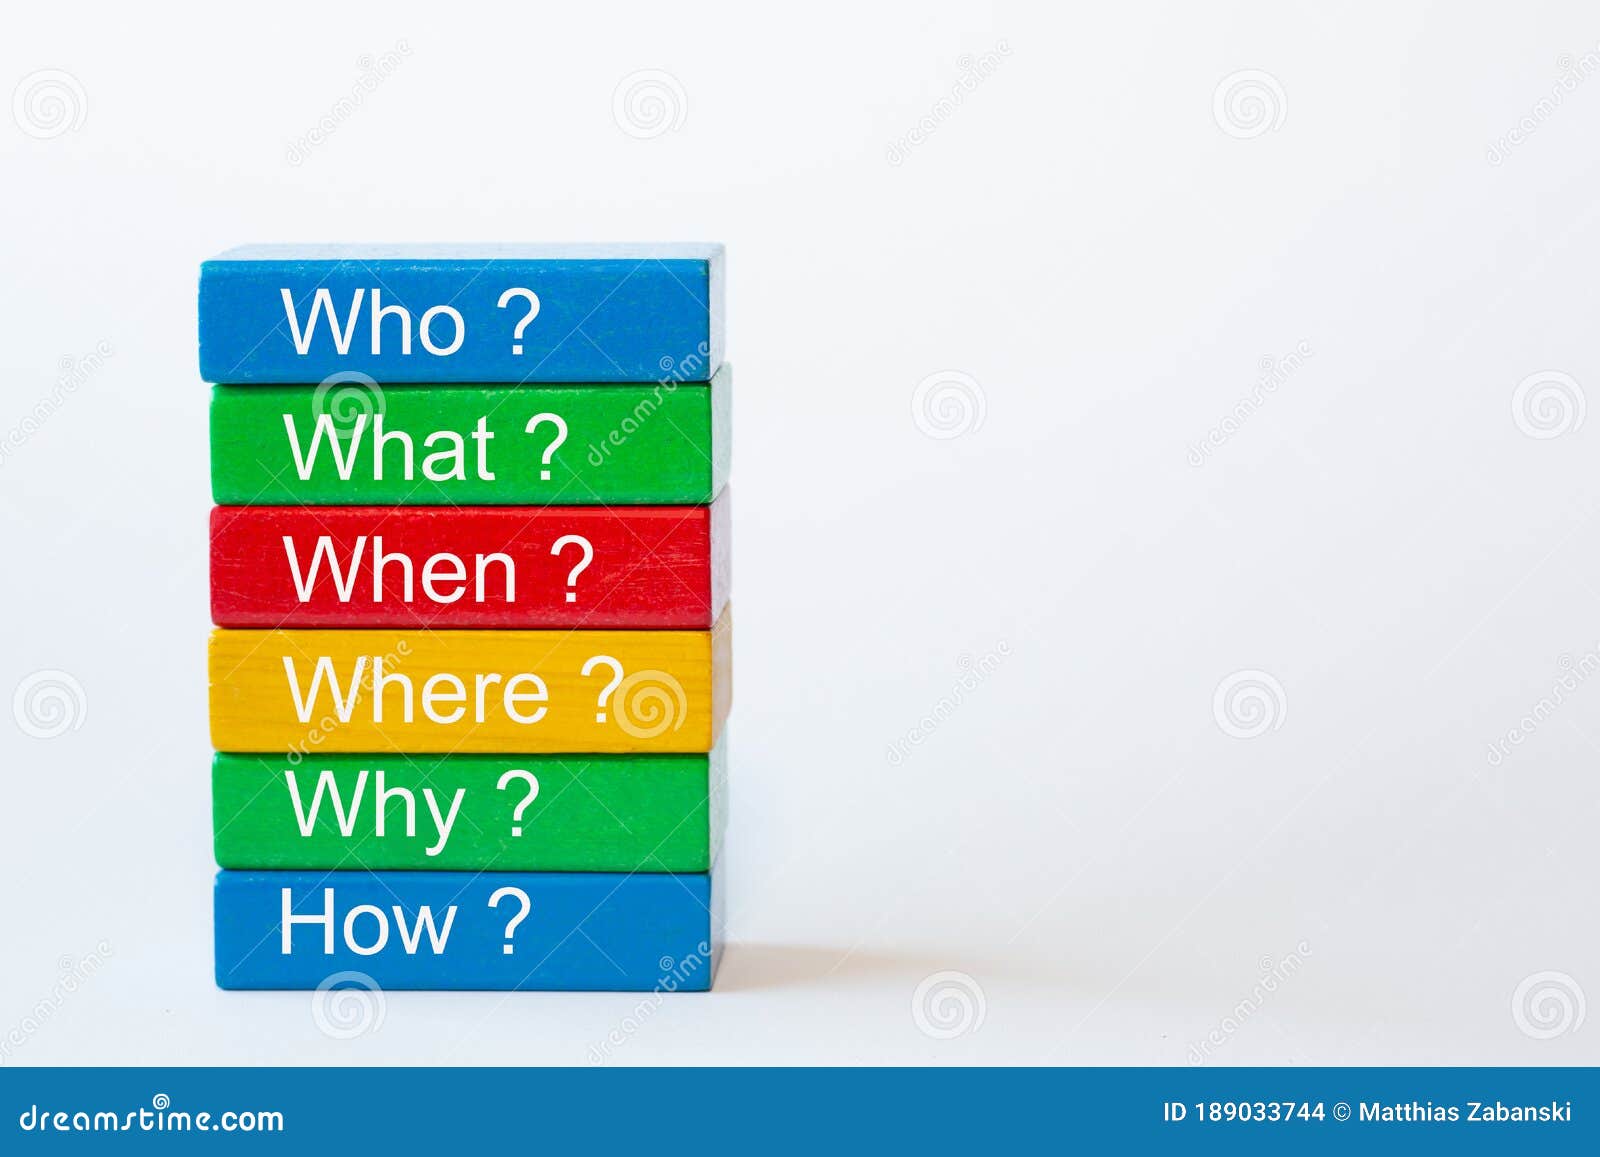 the words: who, what, when, where, why and how are written on colorful blocks